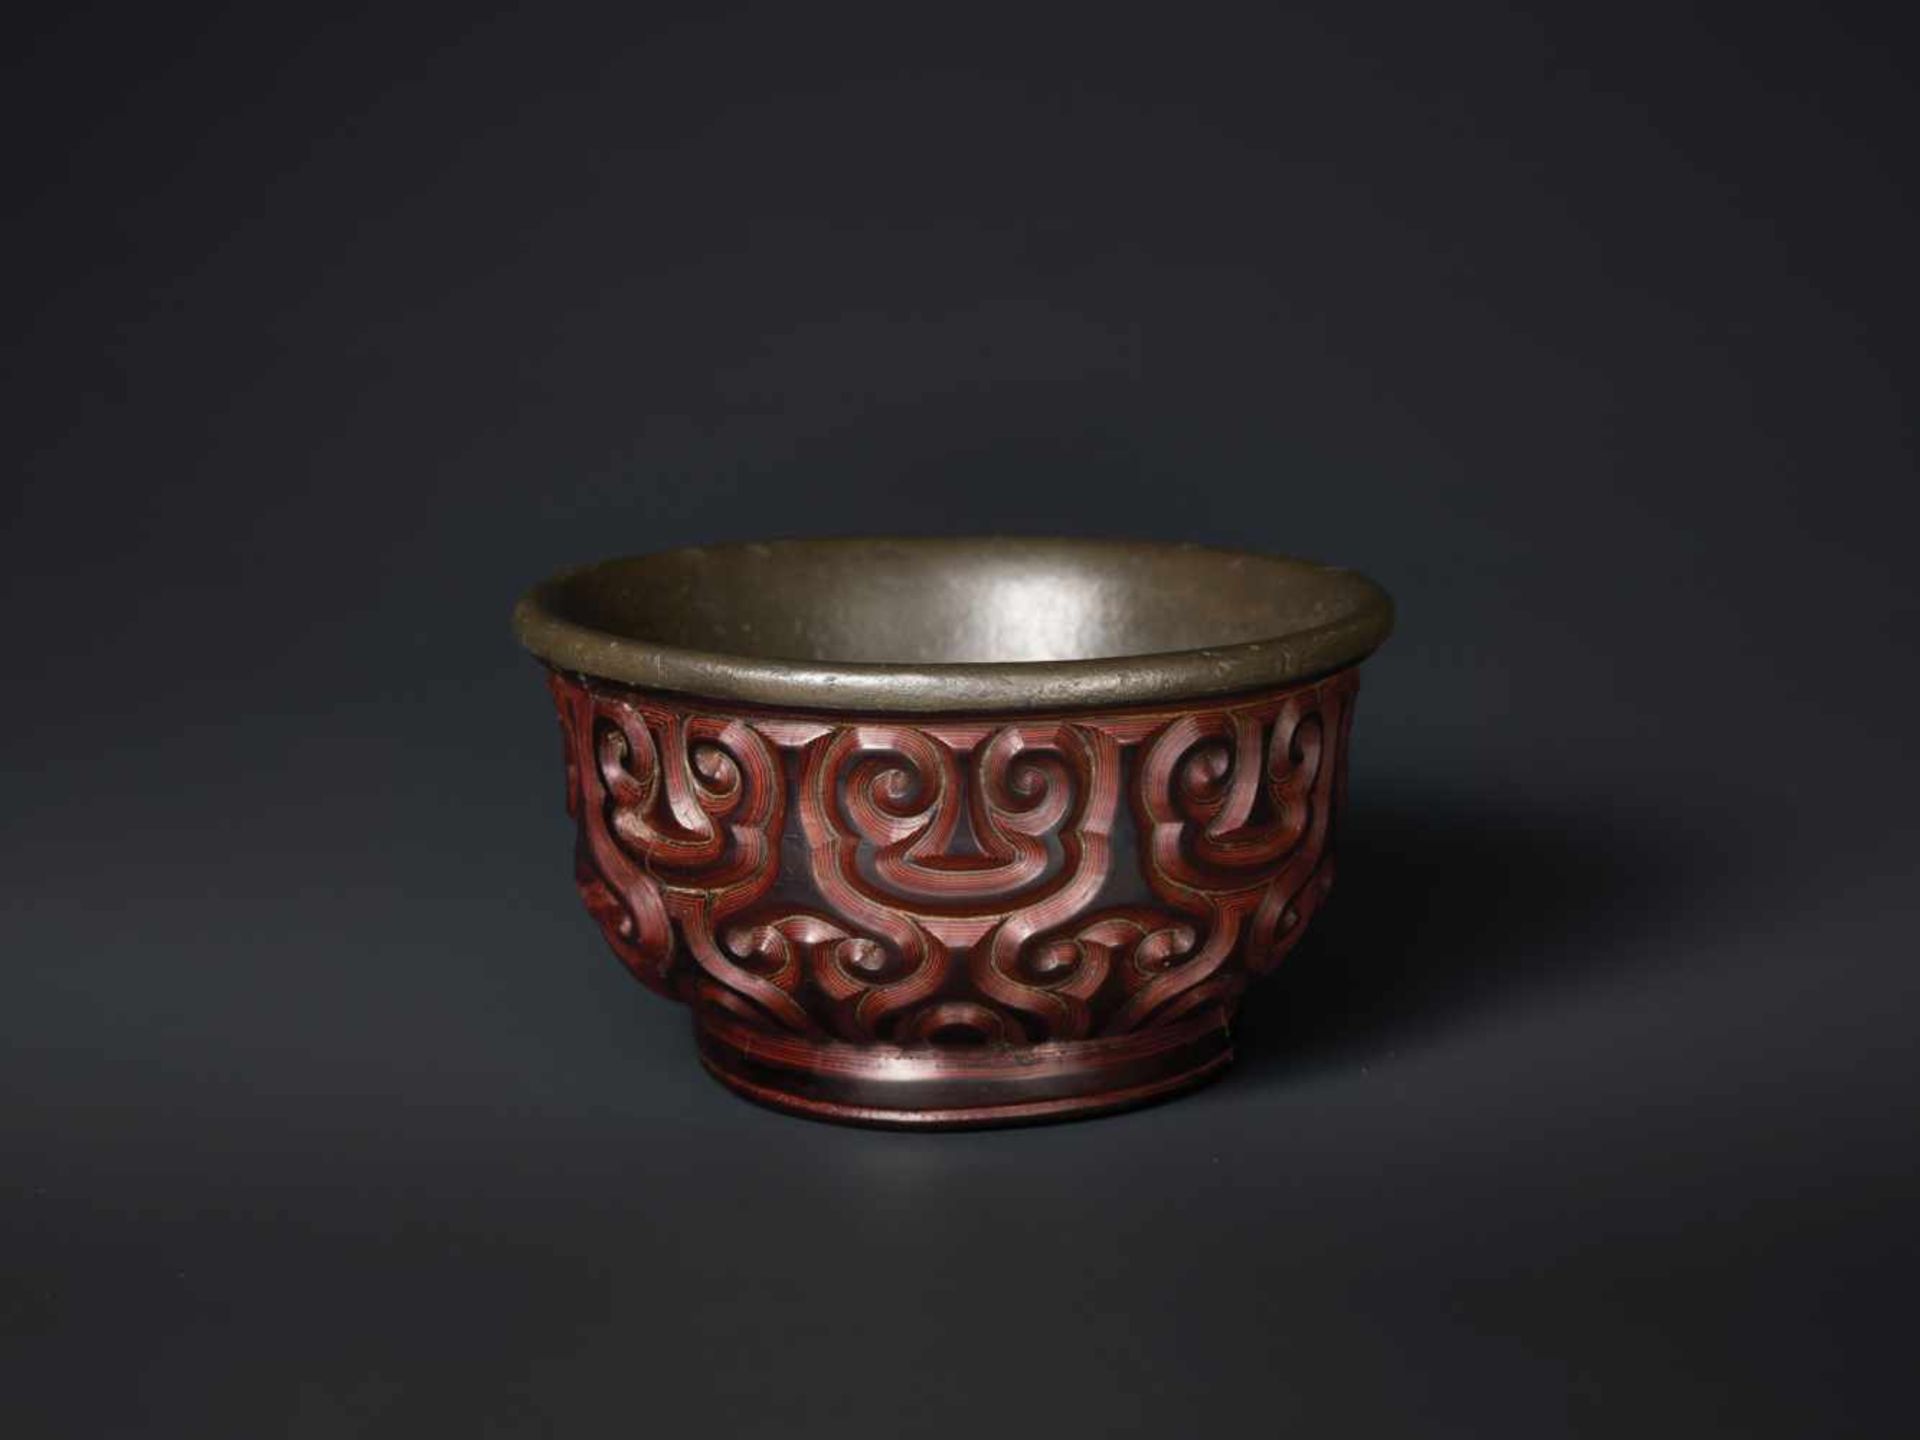 A SONG DYNASTY TIXI LACQUER BOWL WITH PEWTER LINING Multi-layered lacquer, interior lined with